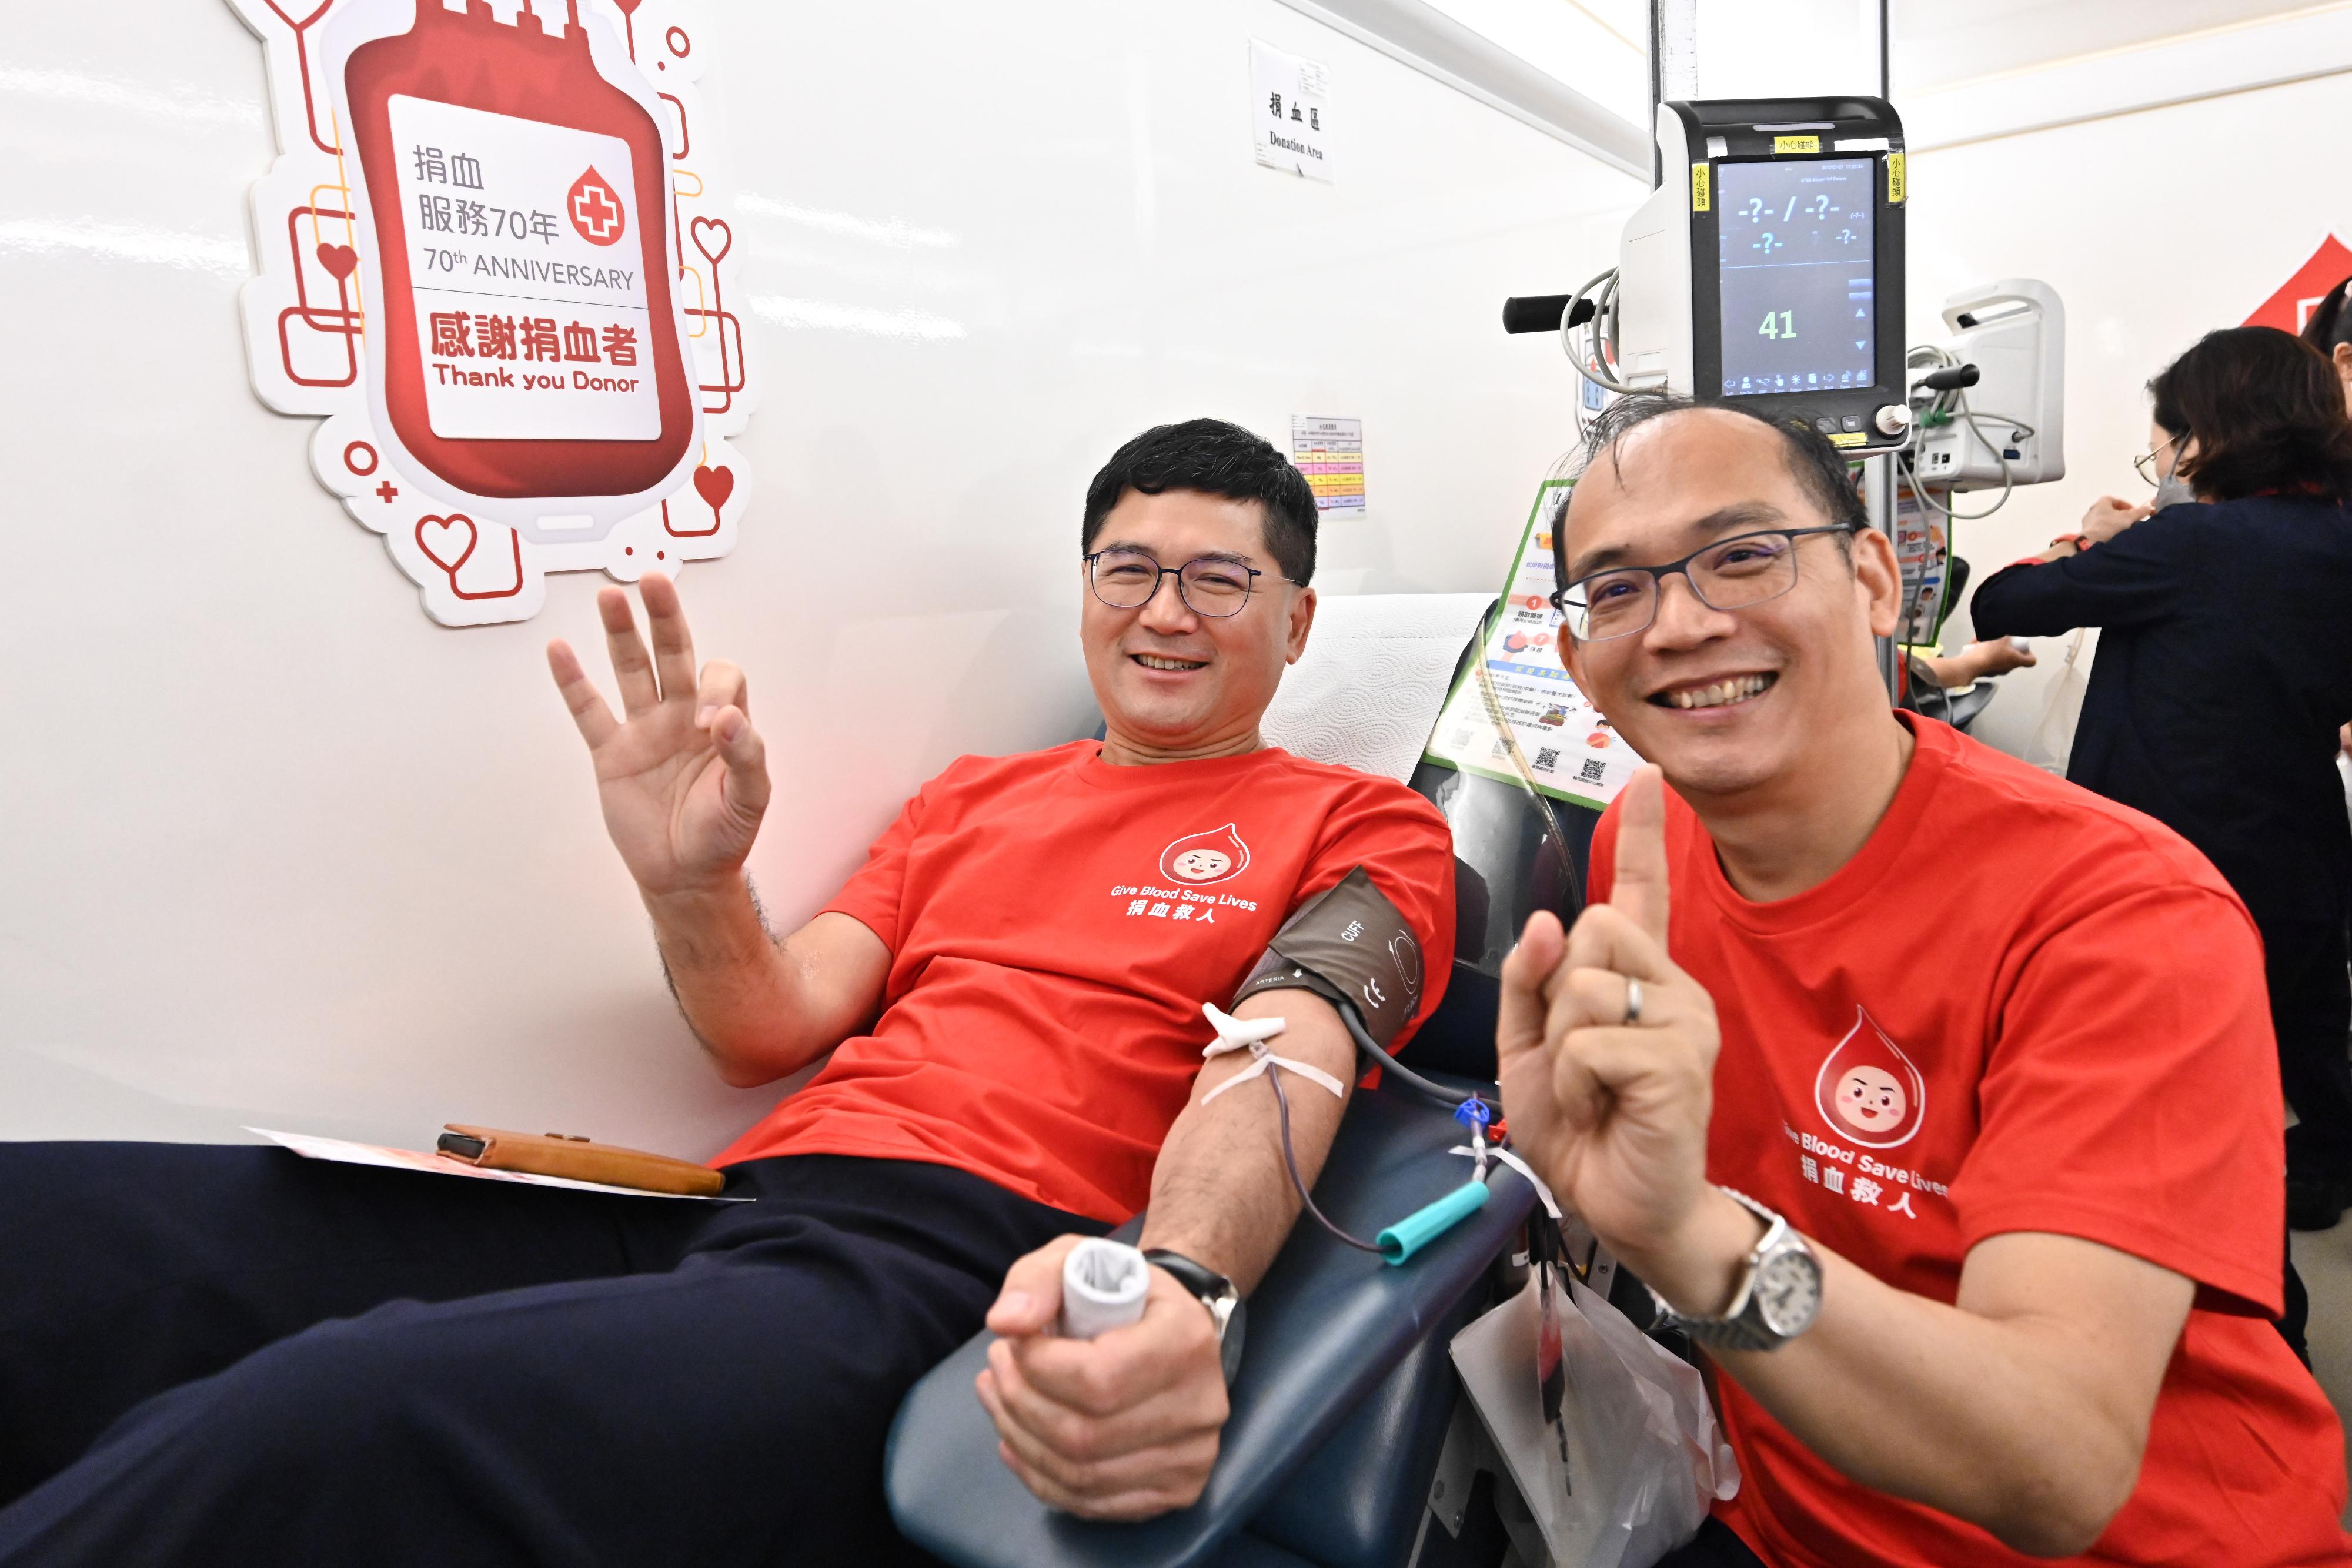 The Chief Executive of the Hospital Authority, Dr Tony Ko (left), donates blood on the mobile blood donation vehicle of the Hong Kong Red Cross Blood Transfusion Service parked at the Central Government Offices today (August 14).